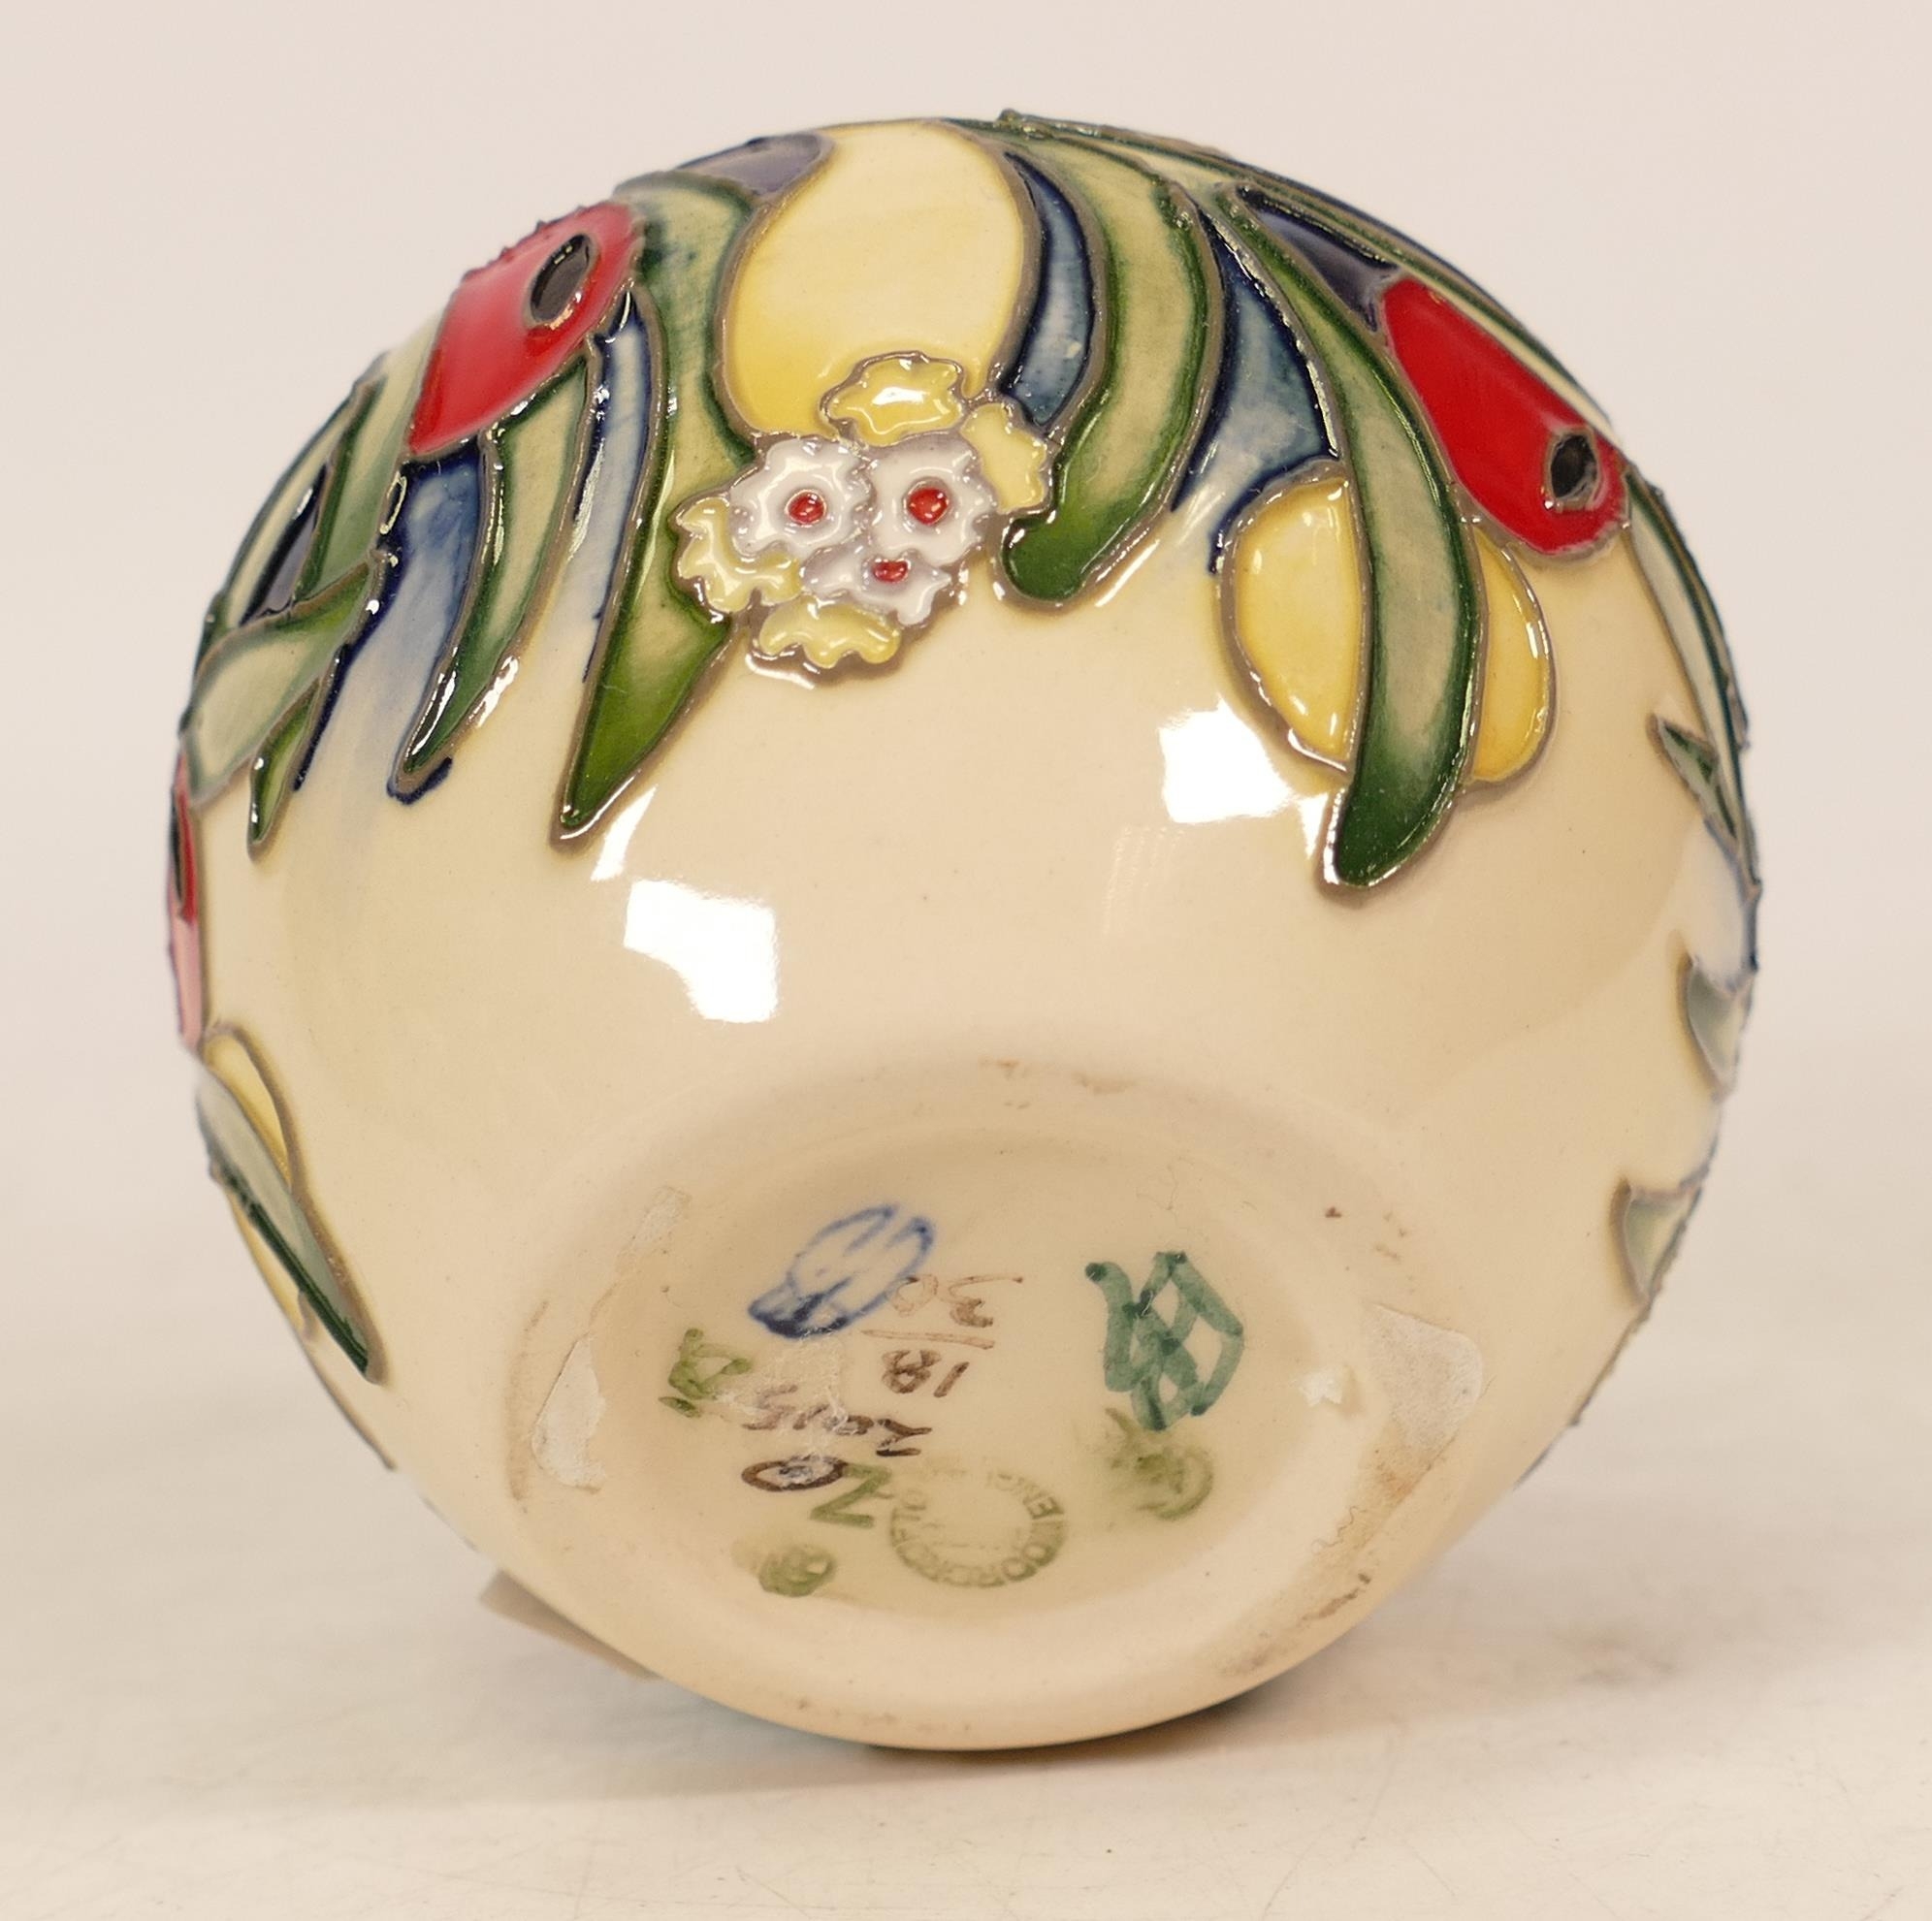 Moorcroft limited edition vase decorated with red berries and green foliage on blue and cream - Image 2 of 2